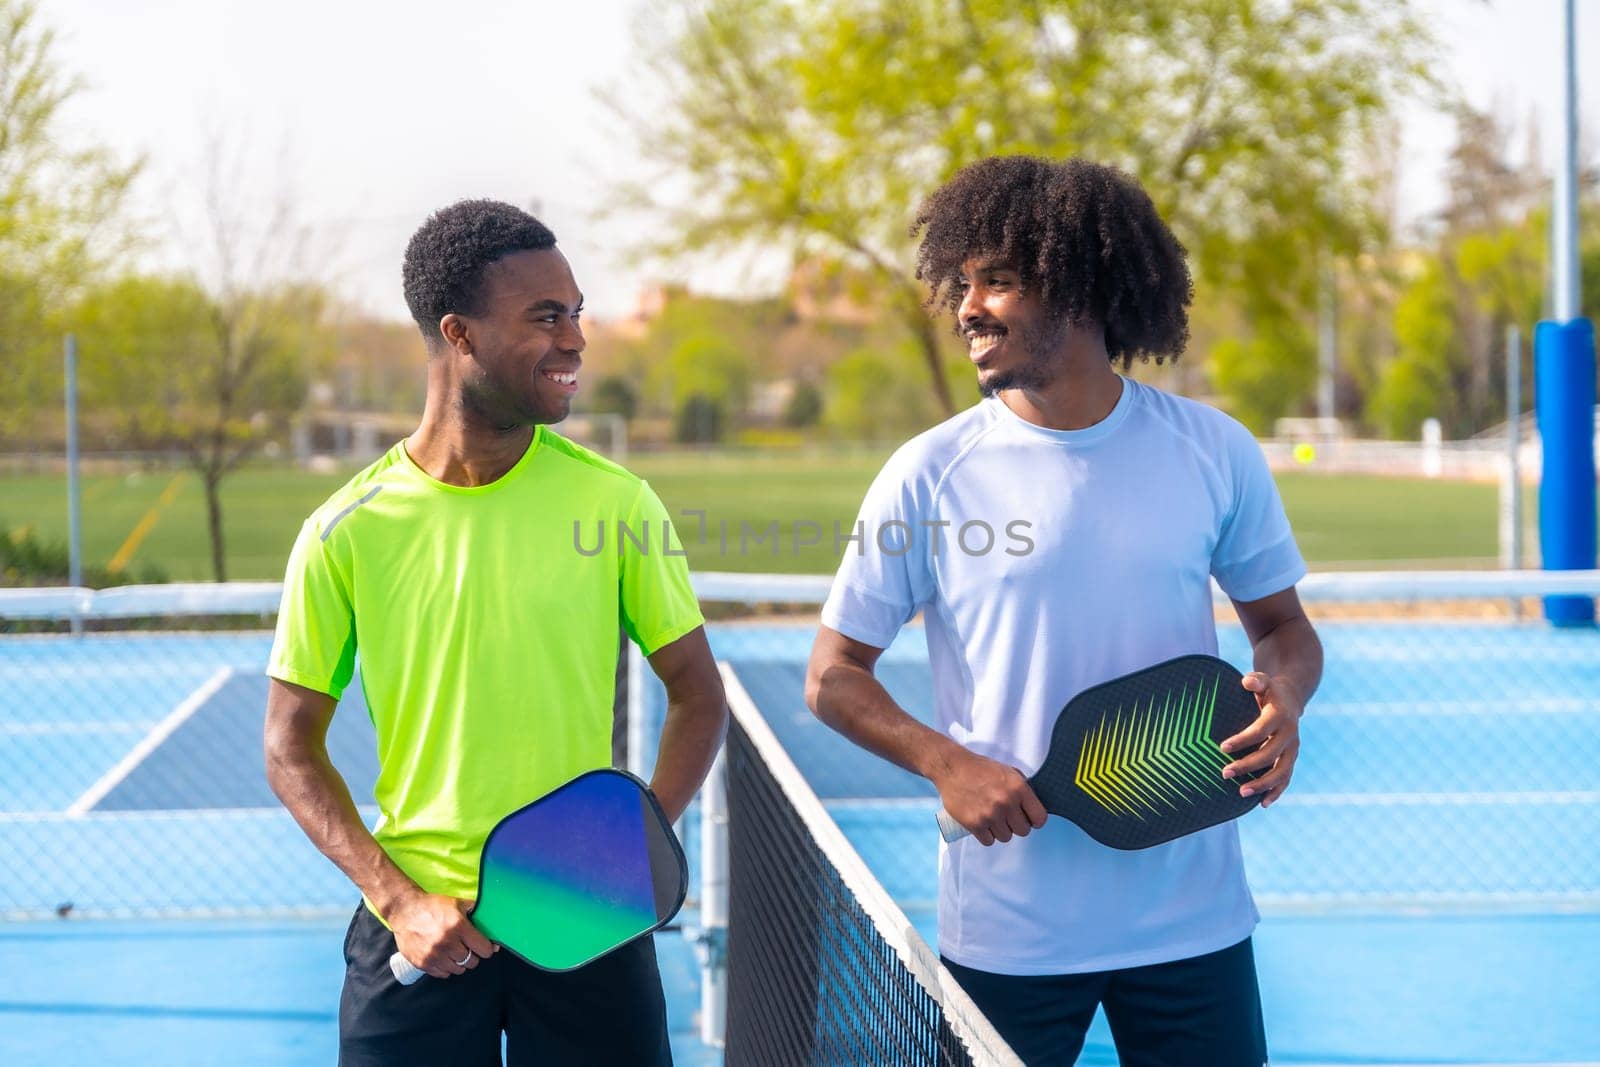 Friends smiling standing in a pickleball court by Huizi